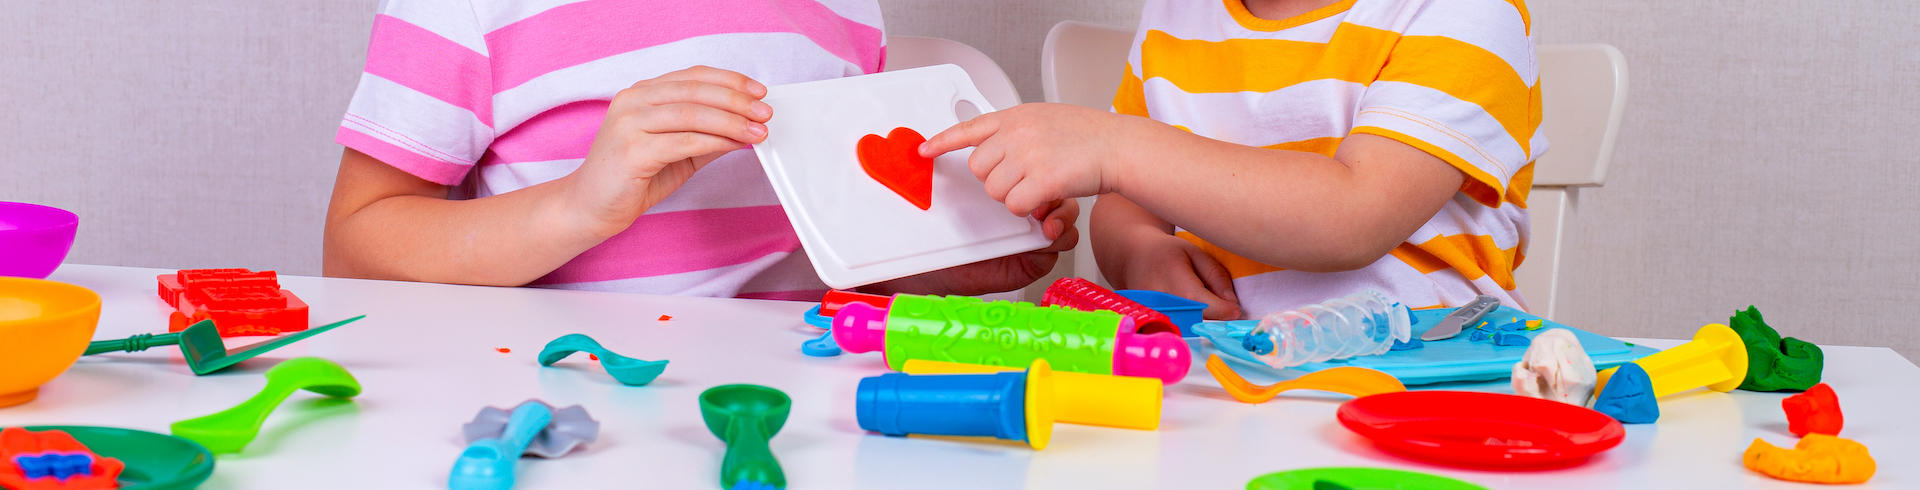 Two children of preschool age playing with colorful toys and one pointing to a red heart.